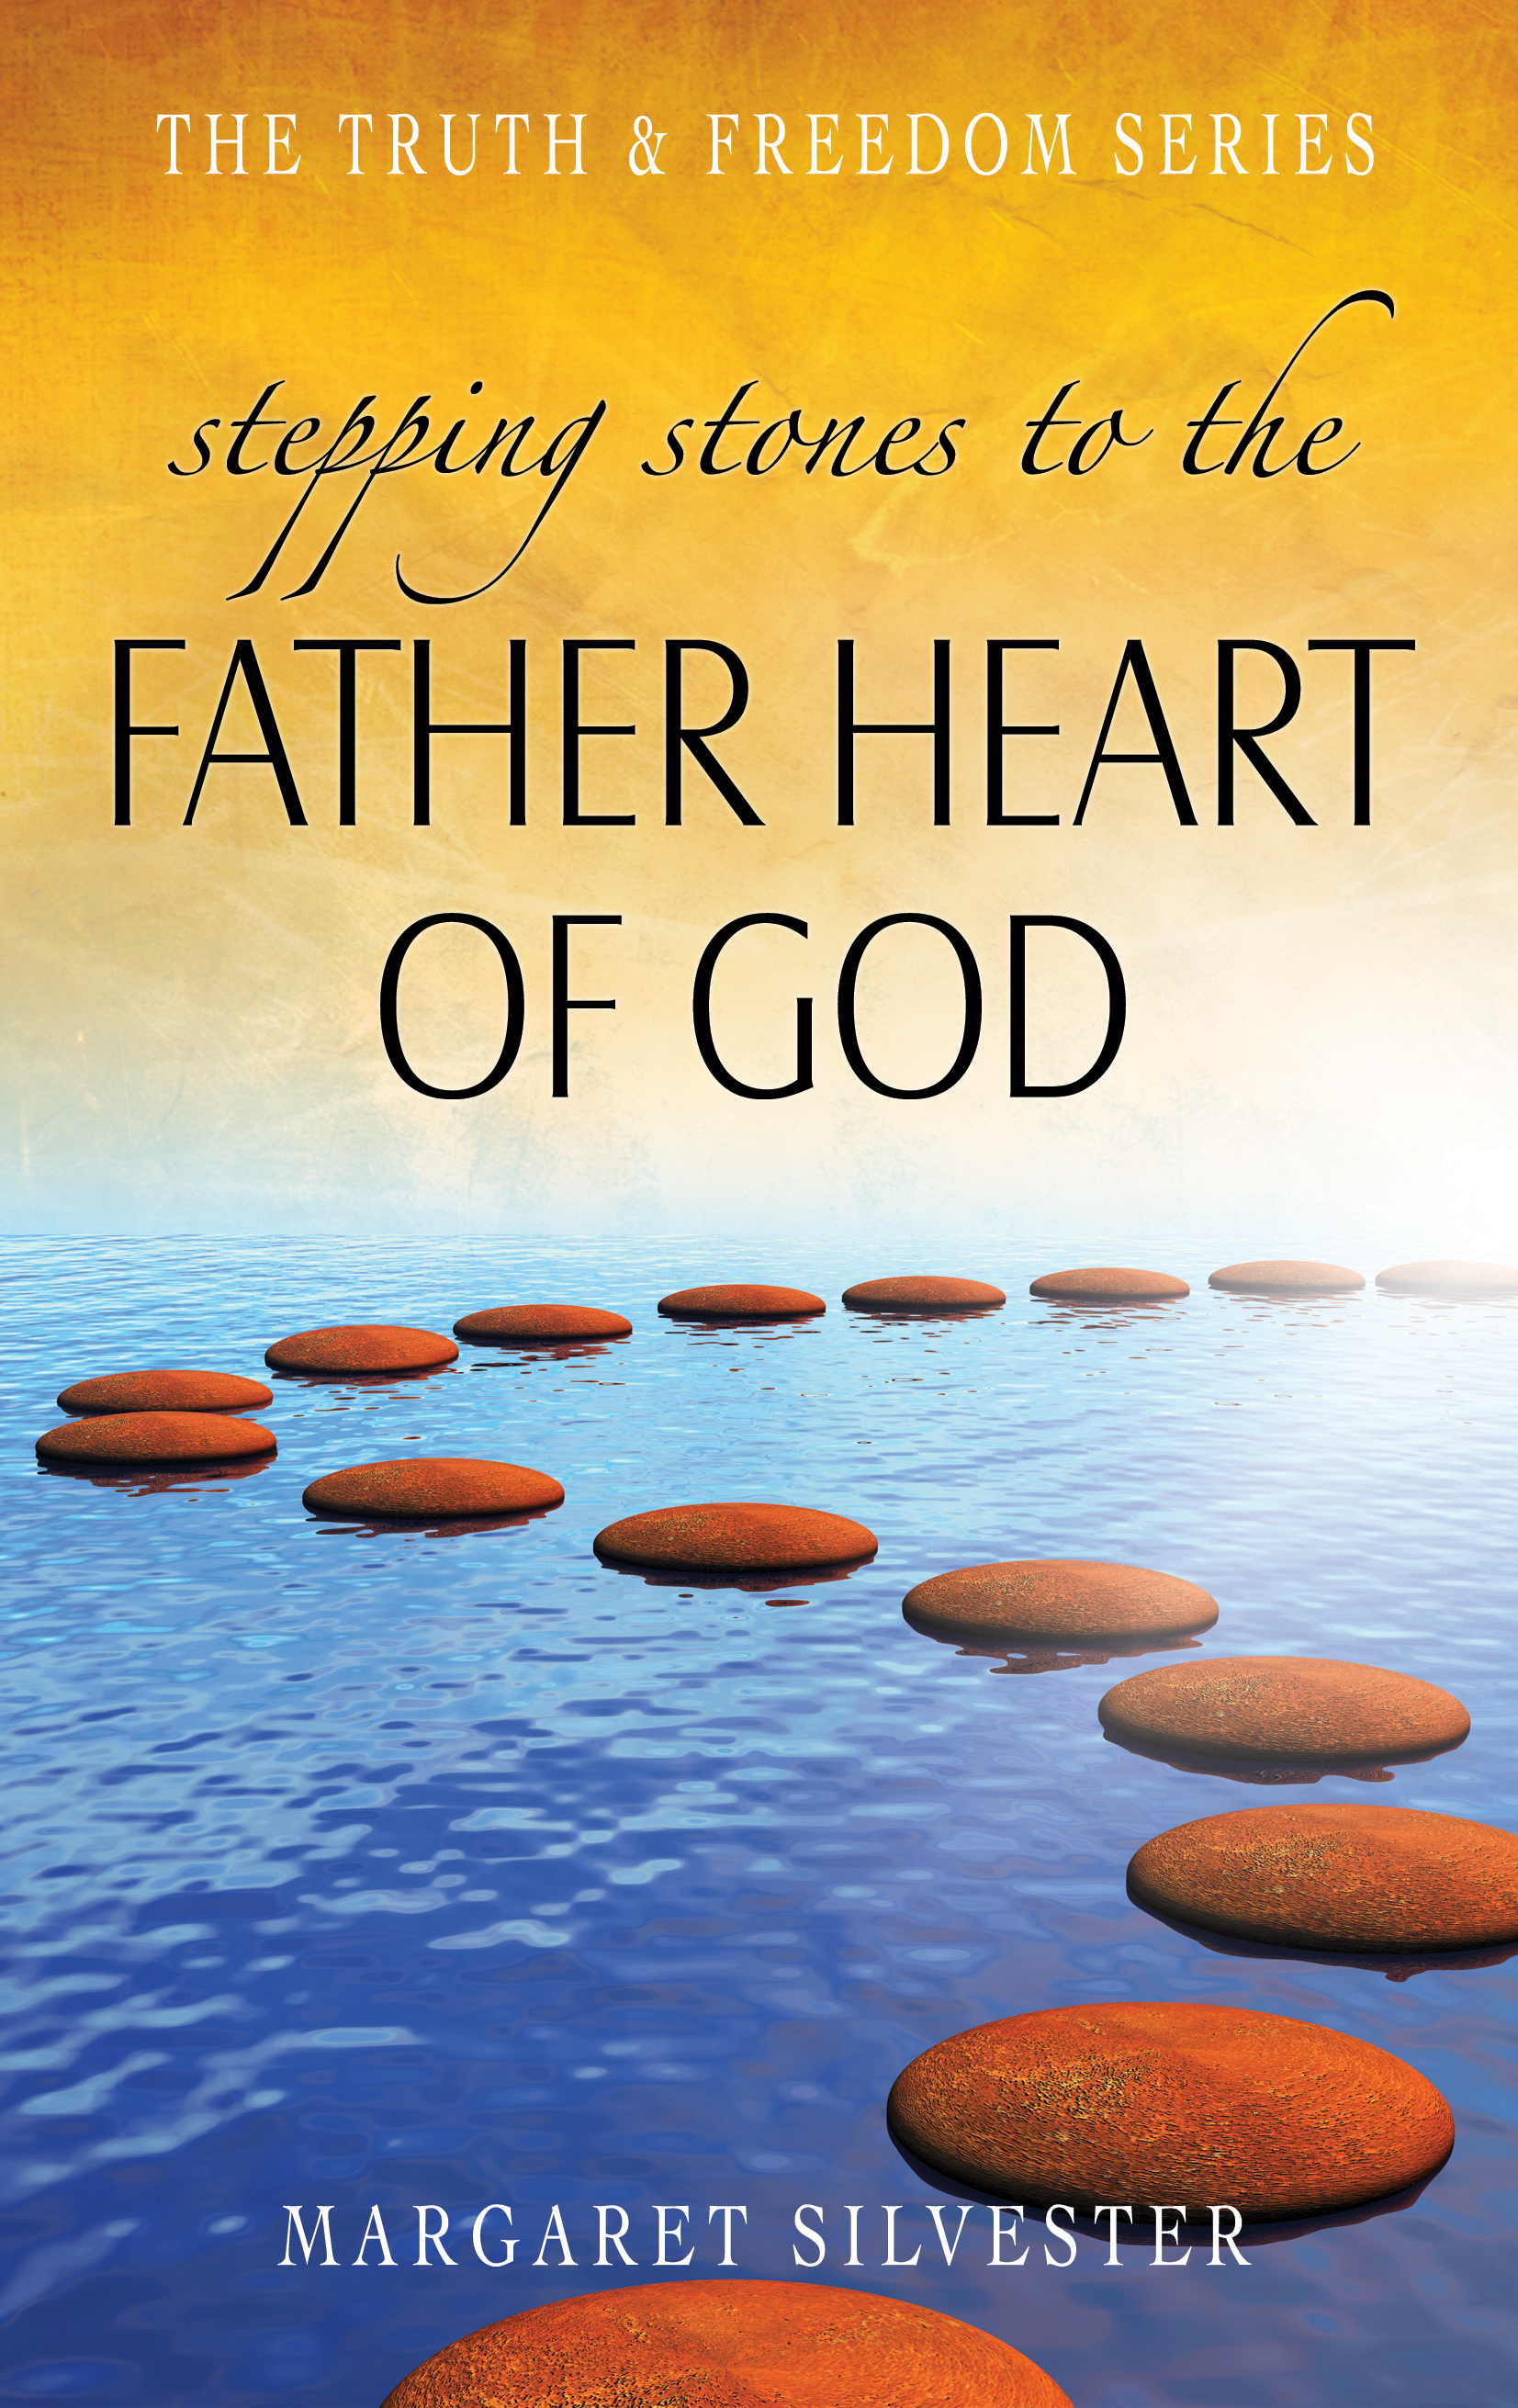 Stepping Stones to the Father Heart of God. Margaret Silvester